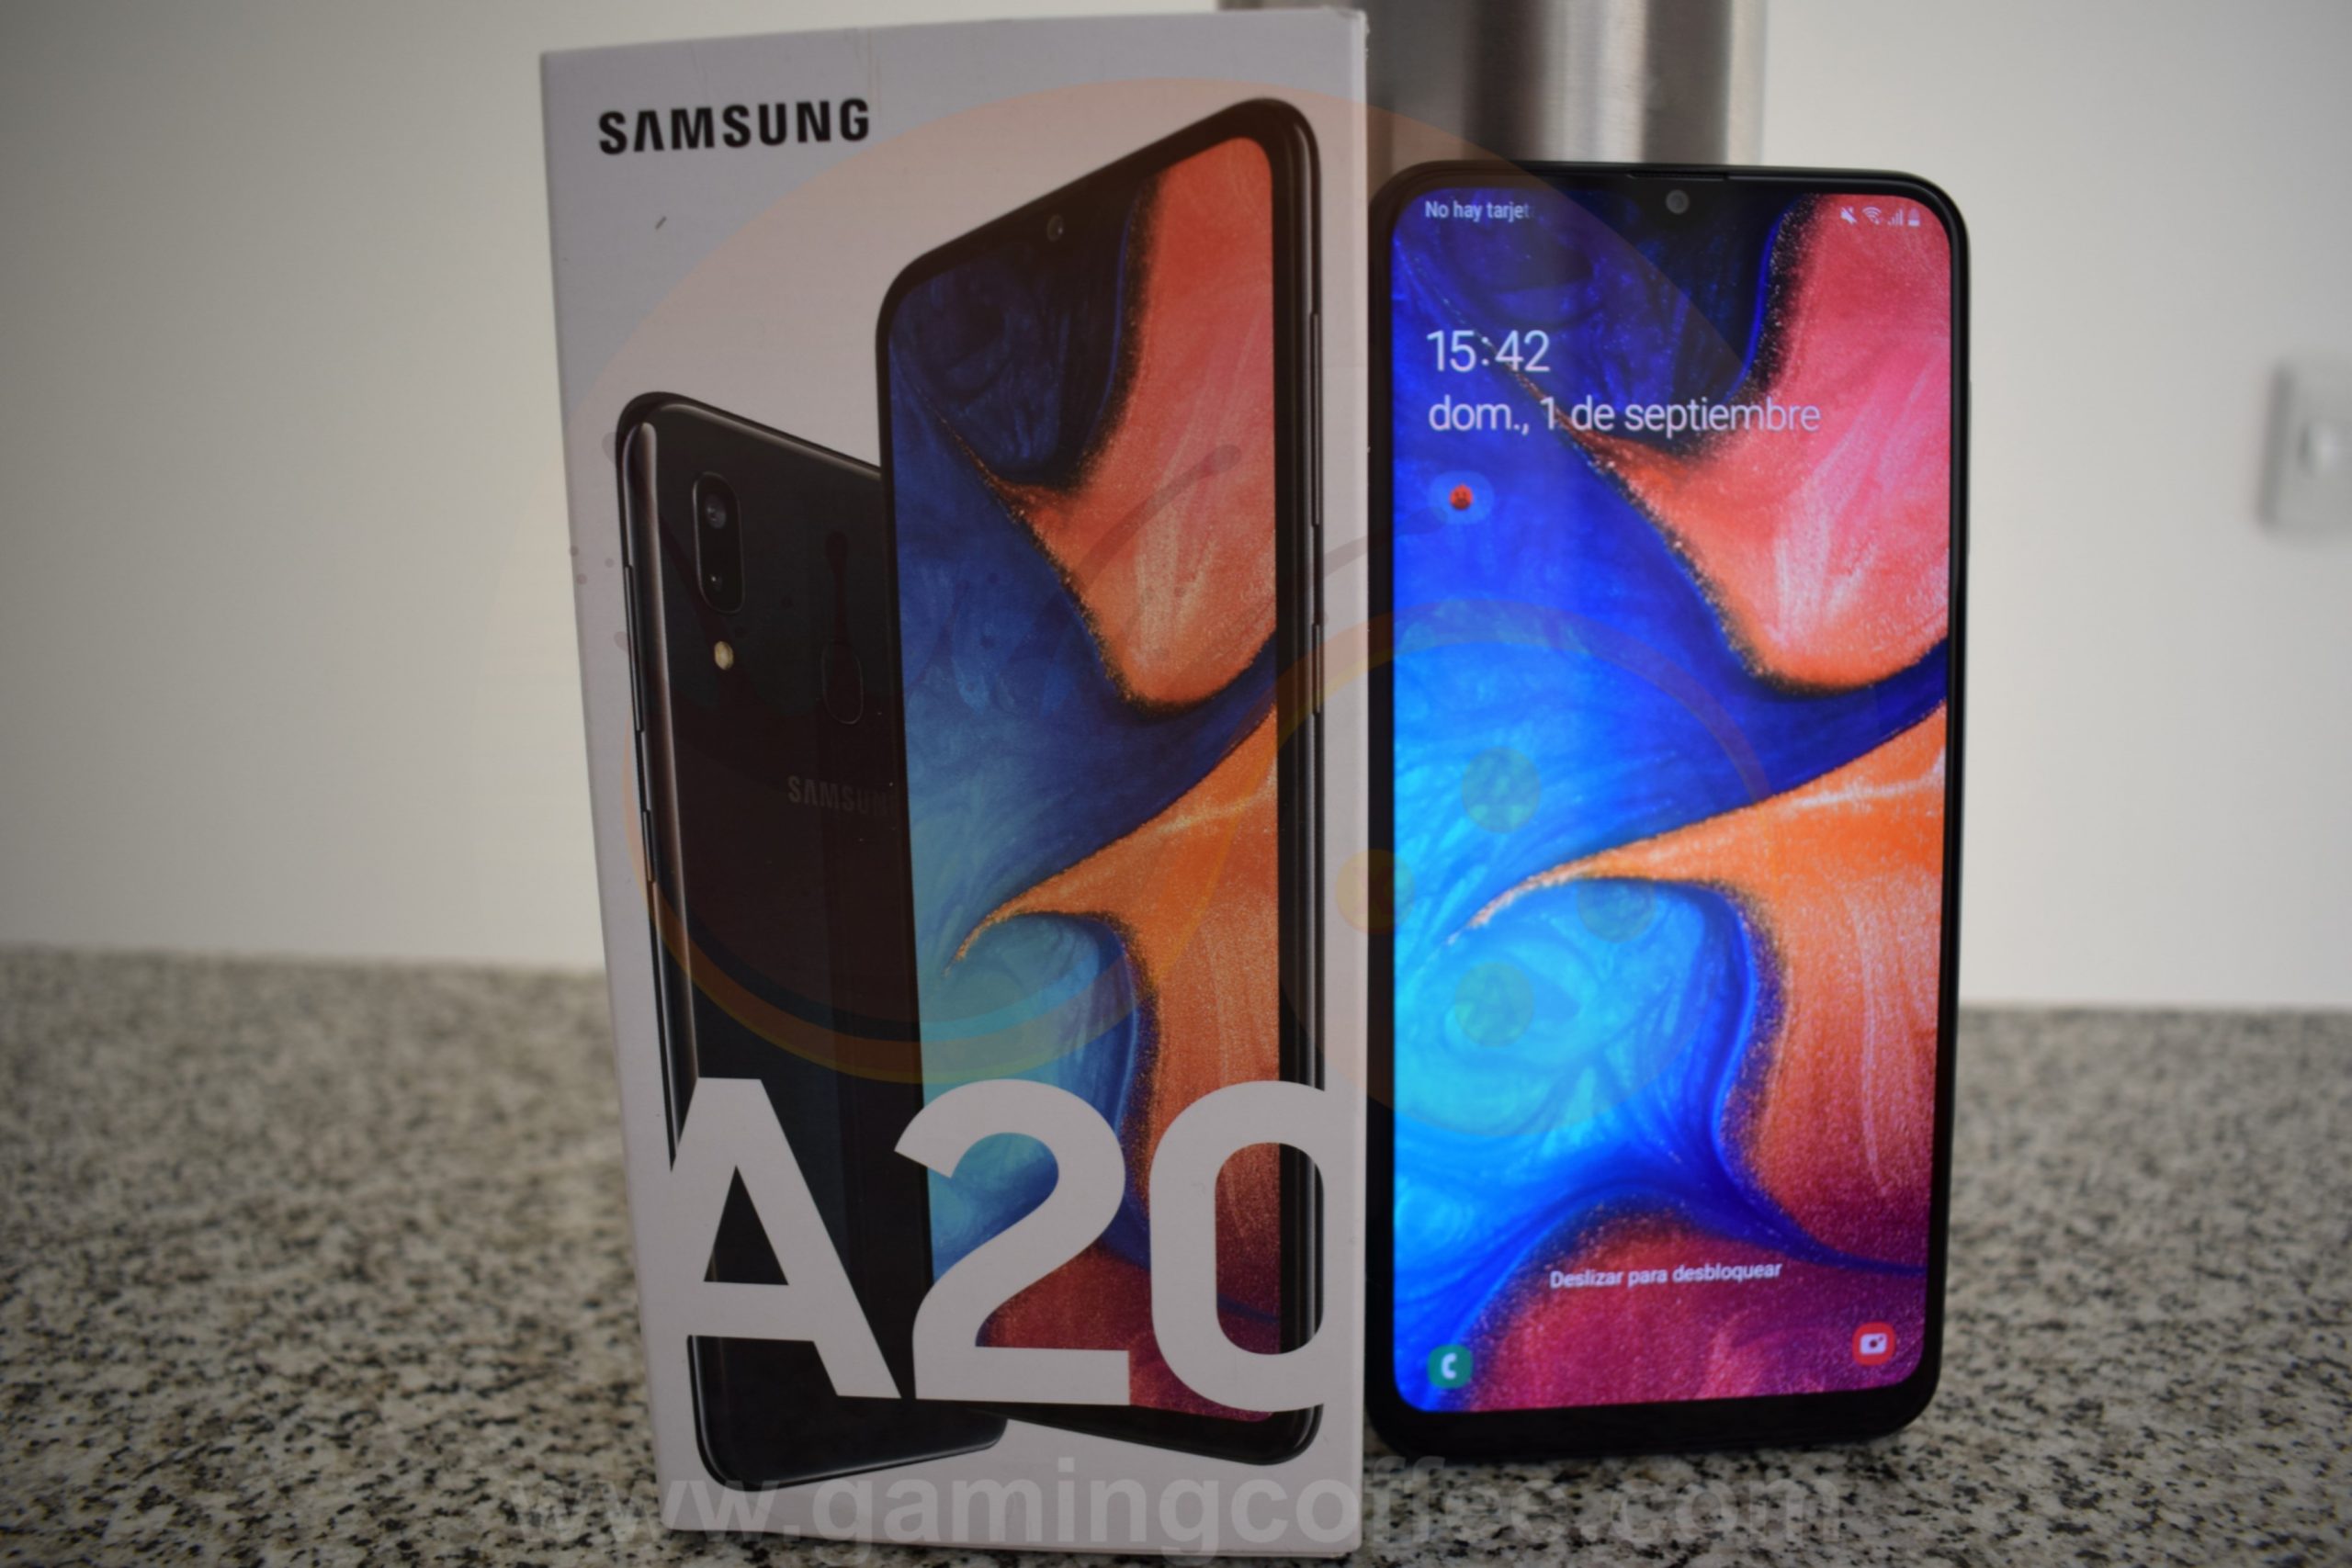 Review] Samsung A20 - Gaming Coffee